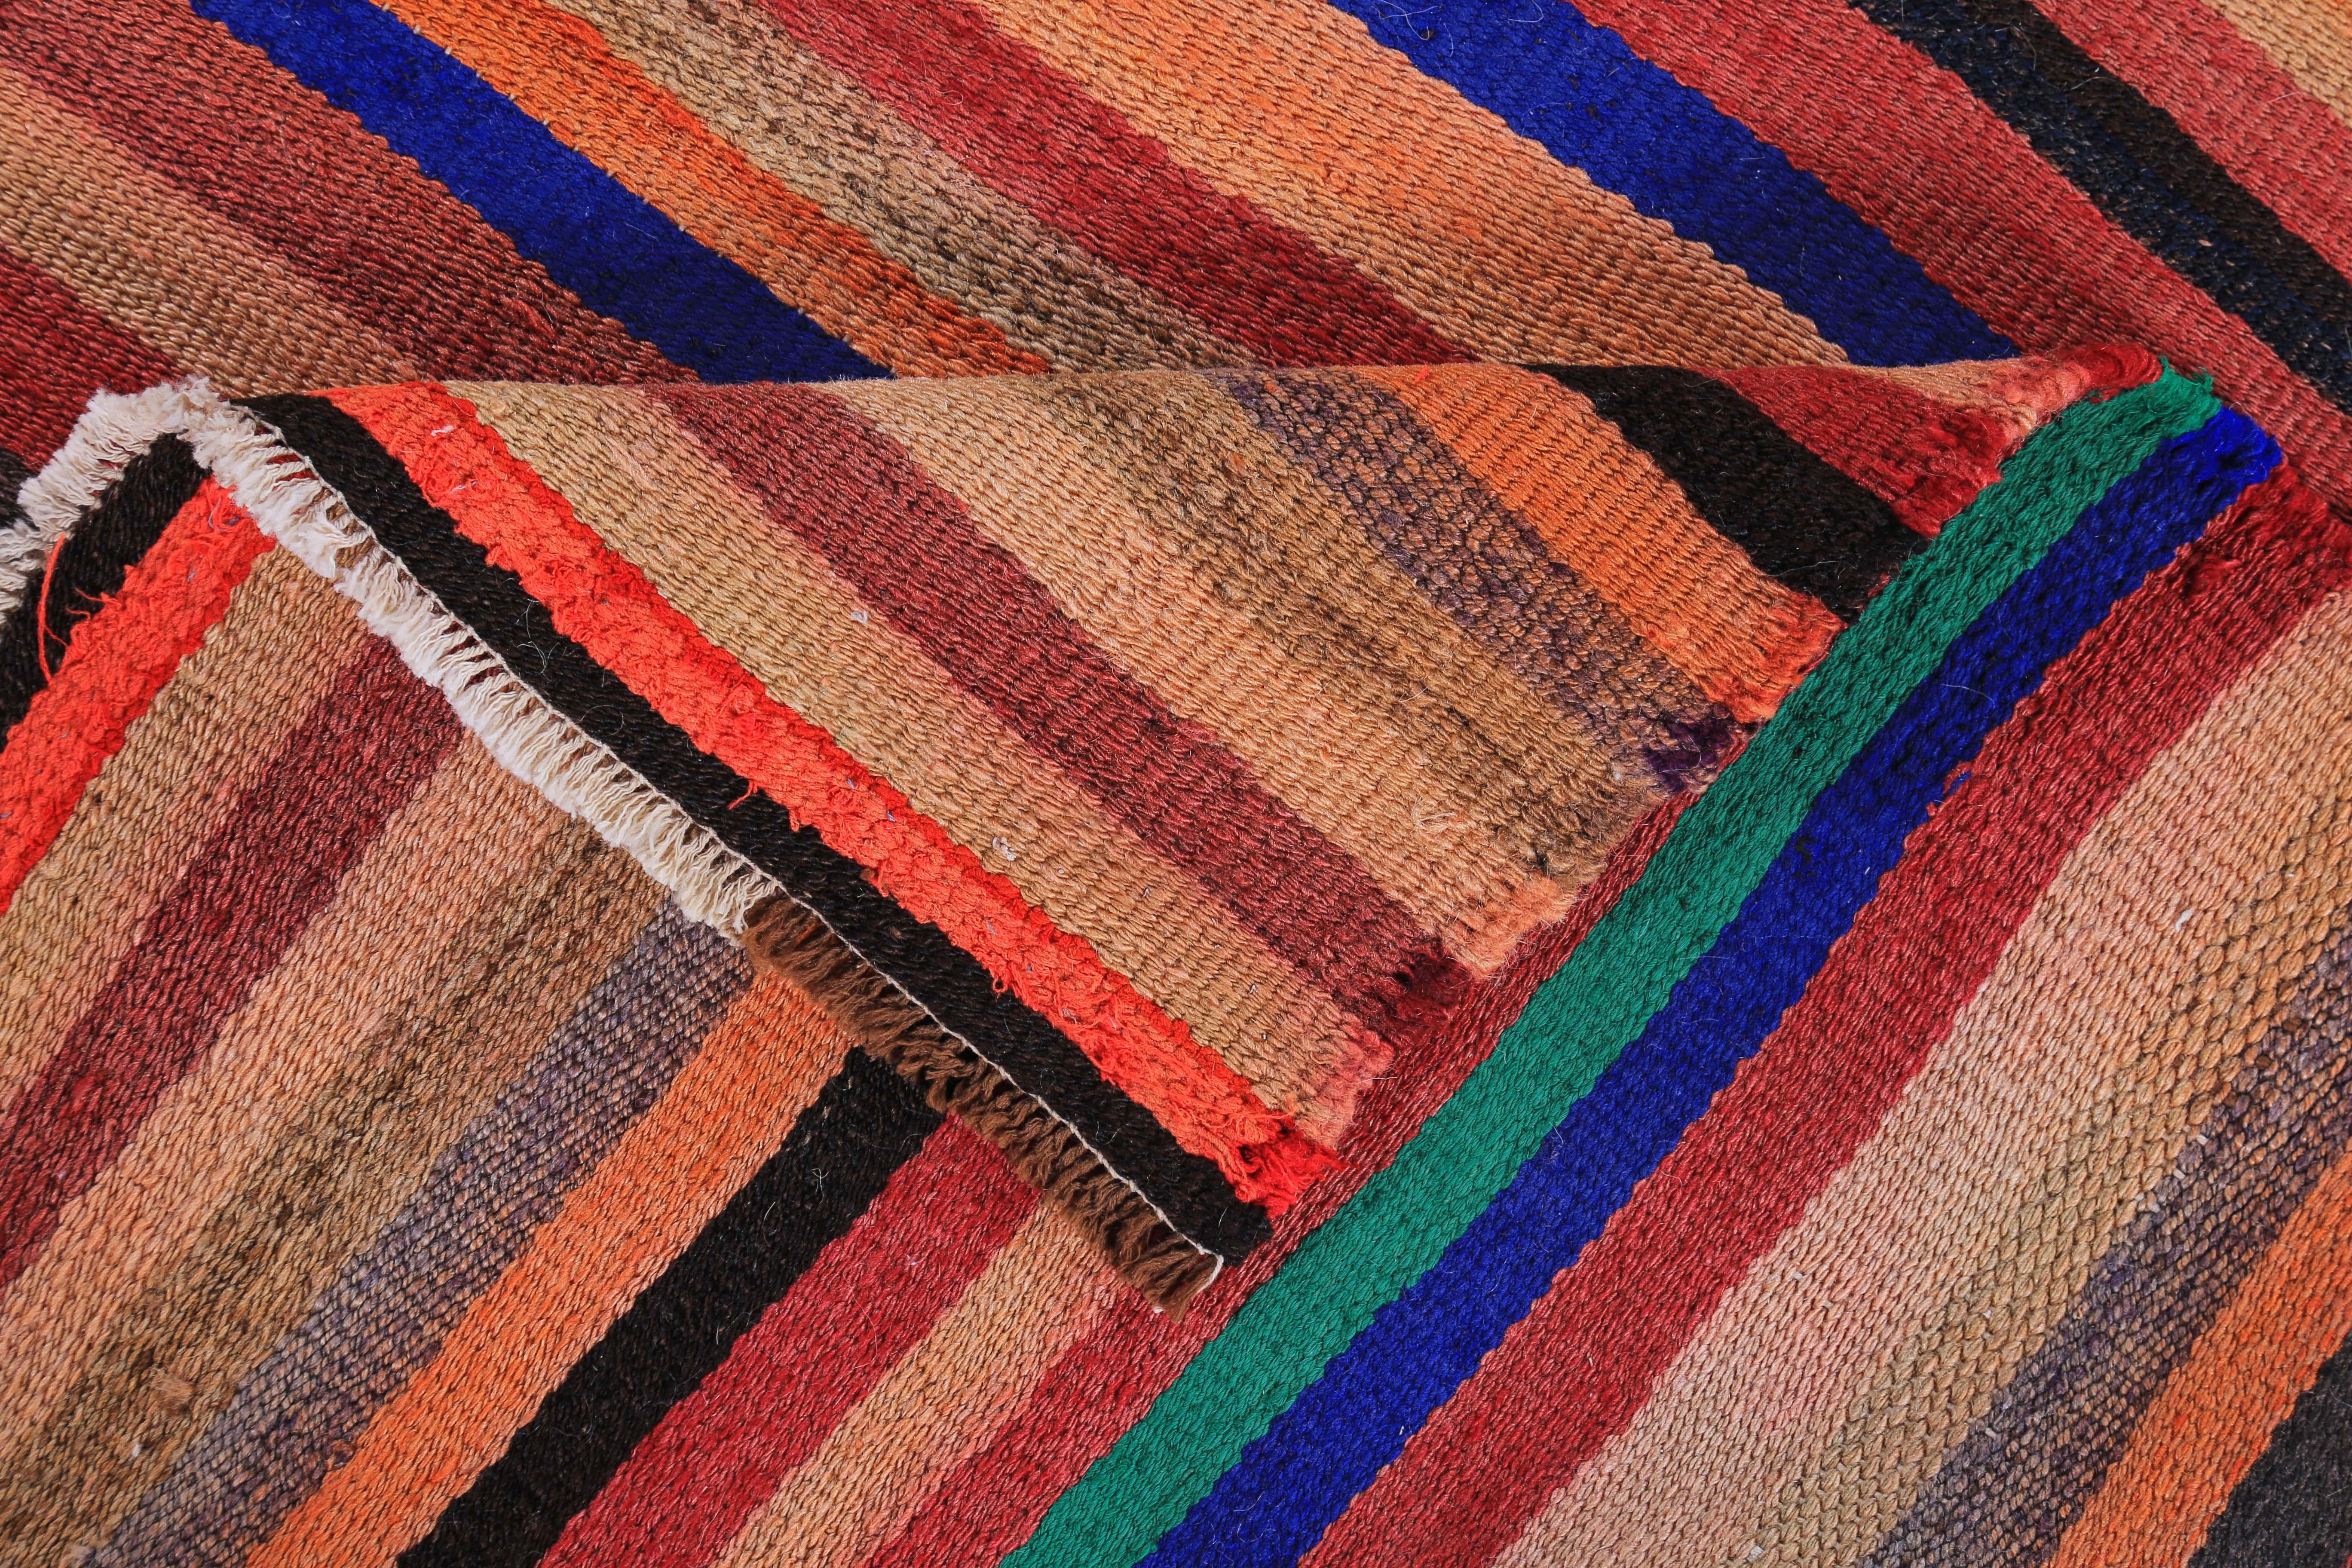 Hand-Woven Modern Turkish Kilim Rug in Orange, Red and Blue Stripes For Sale